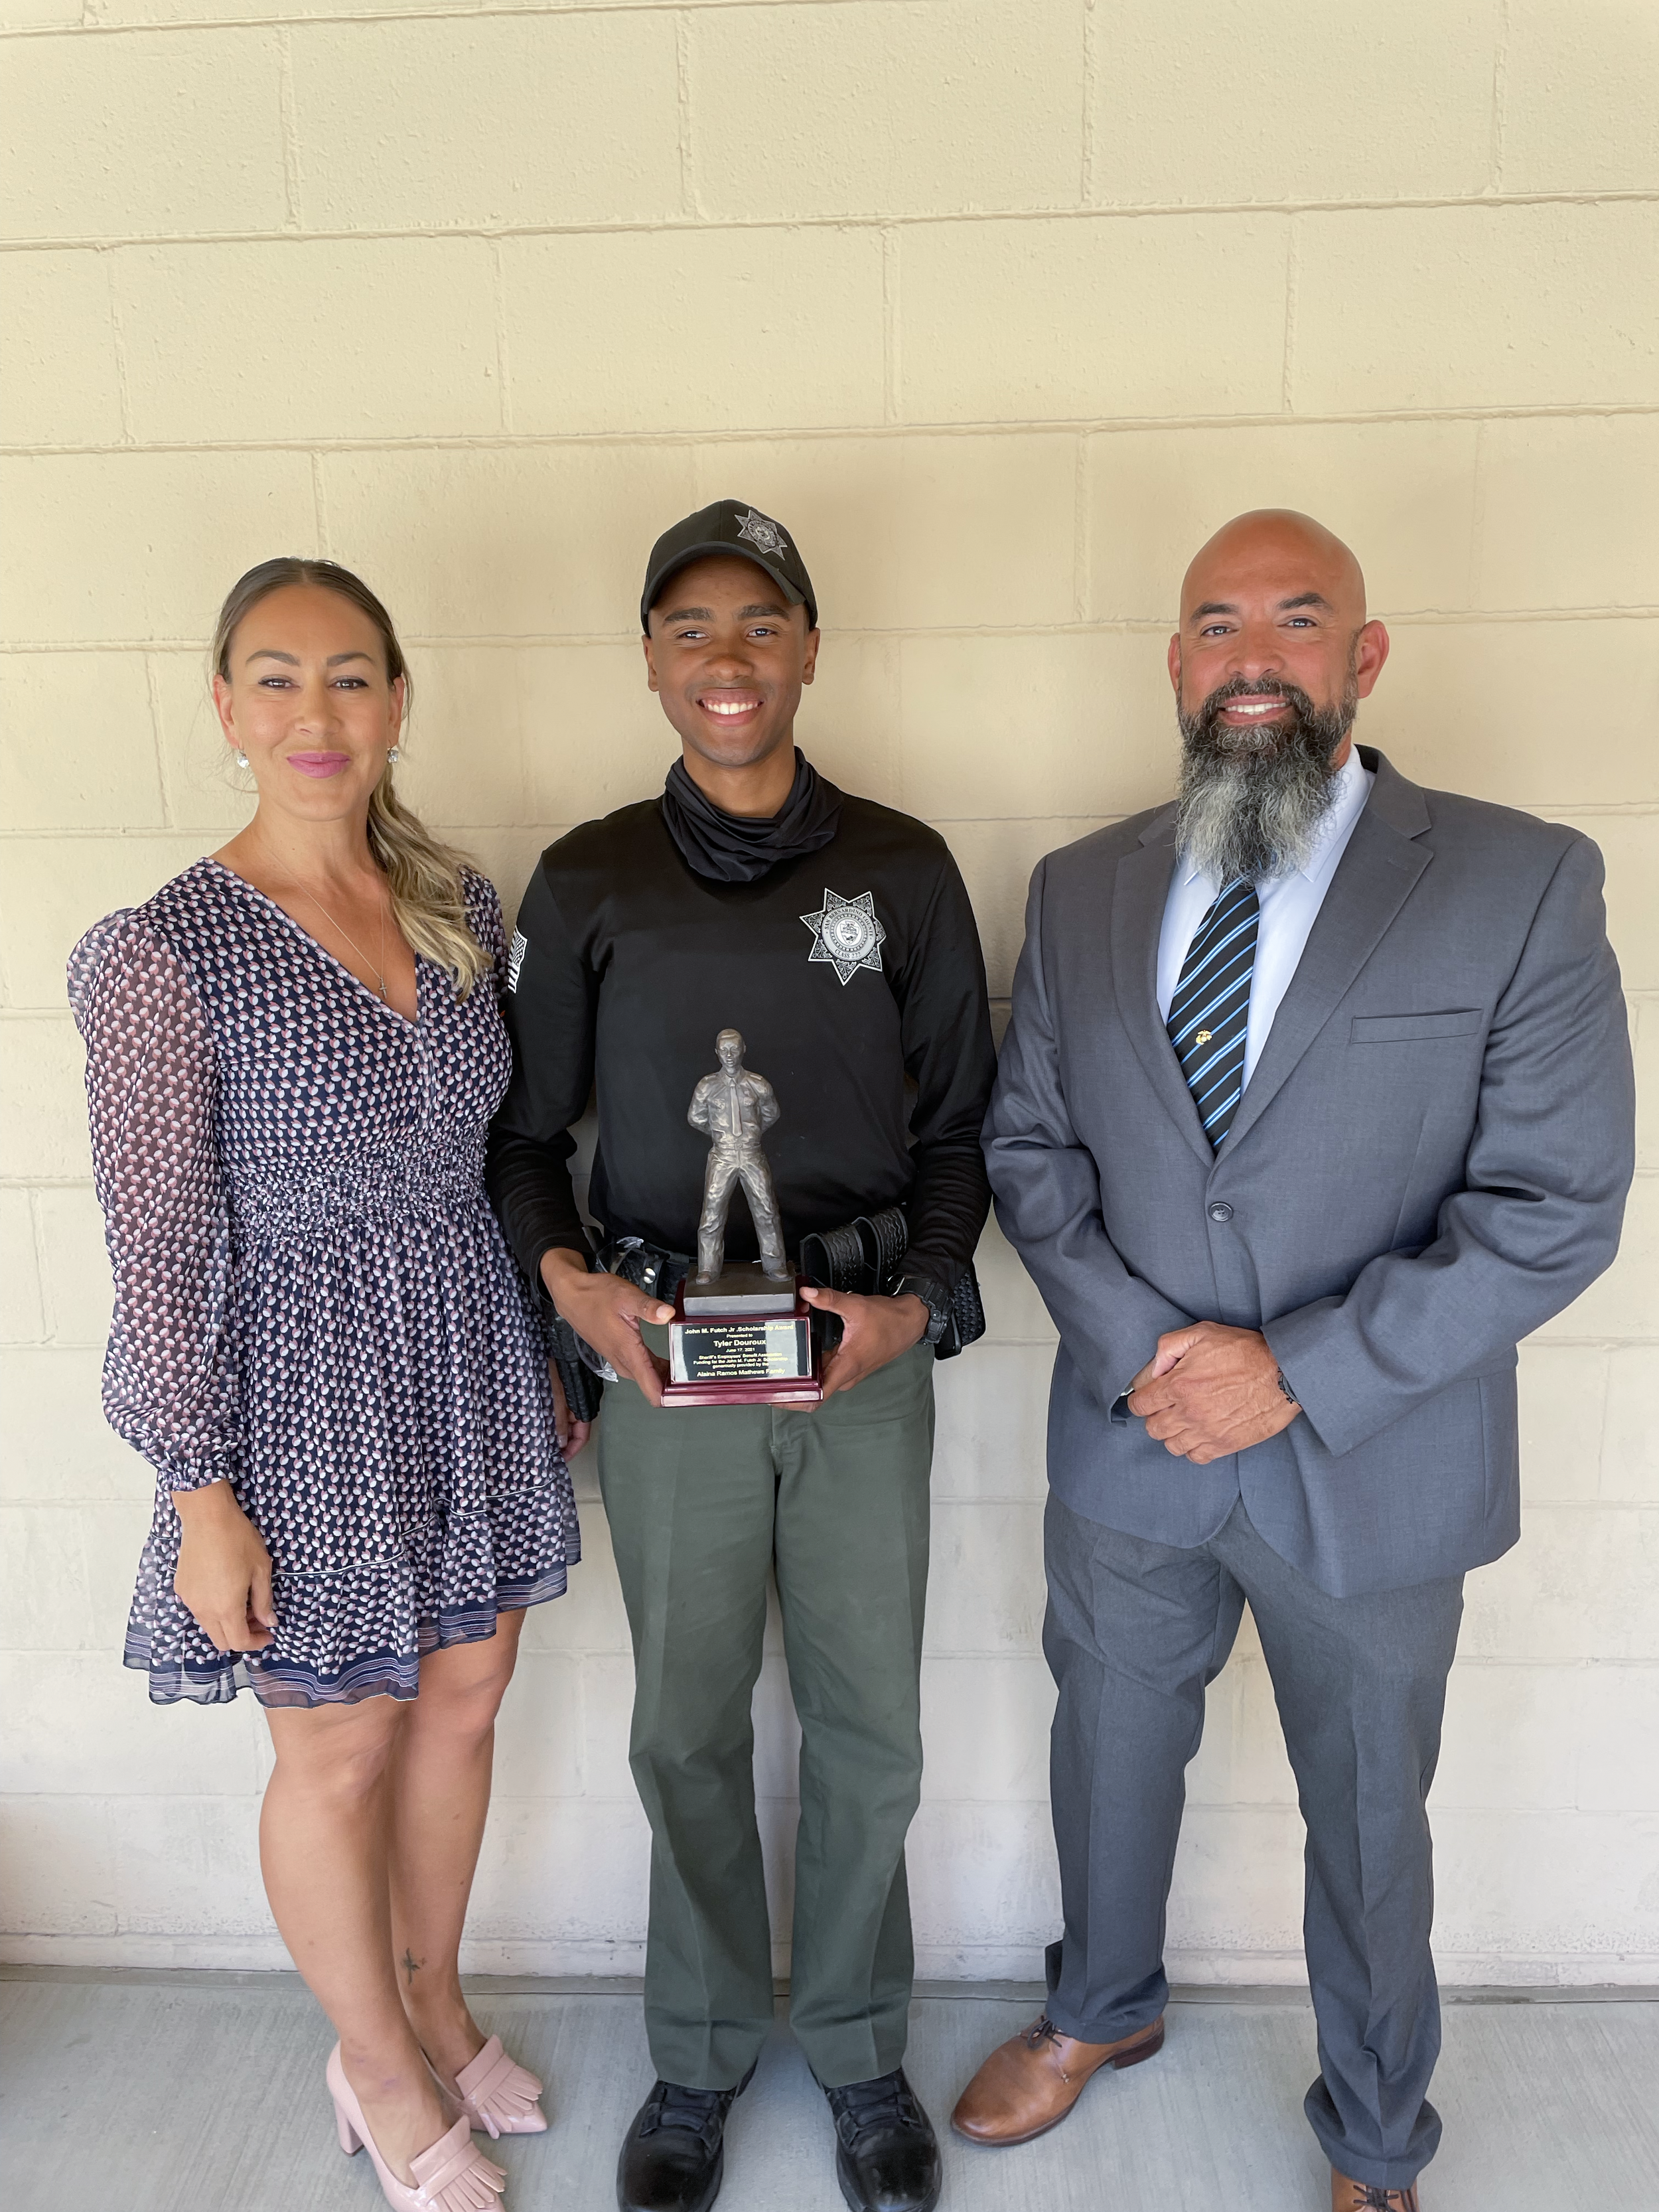 2021 Honoree: Tyler Douroux (pictured center with Executive Director Lolita Harper and SEBA Vice President Danny Rosa)